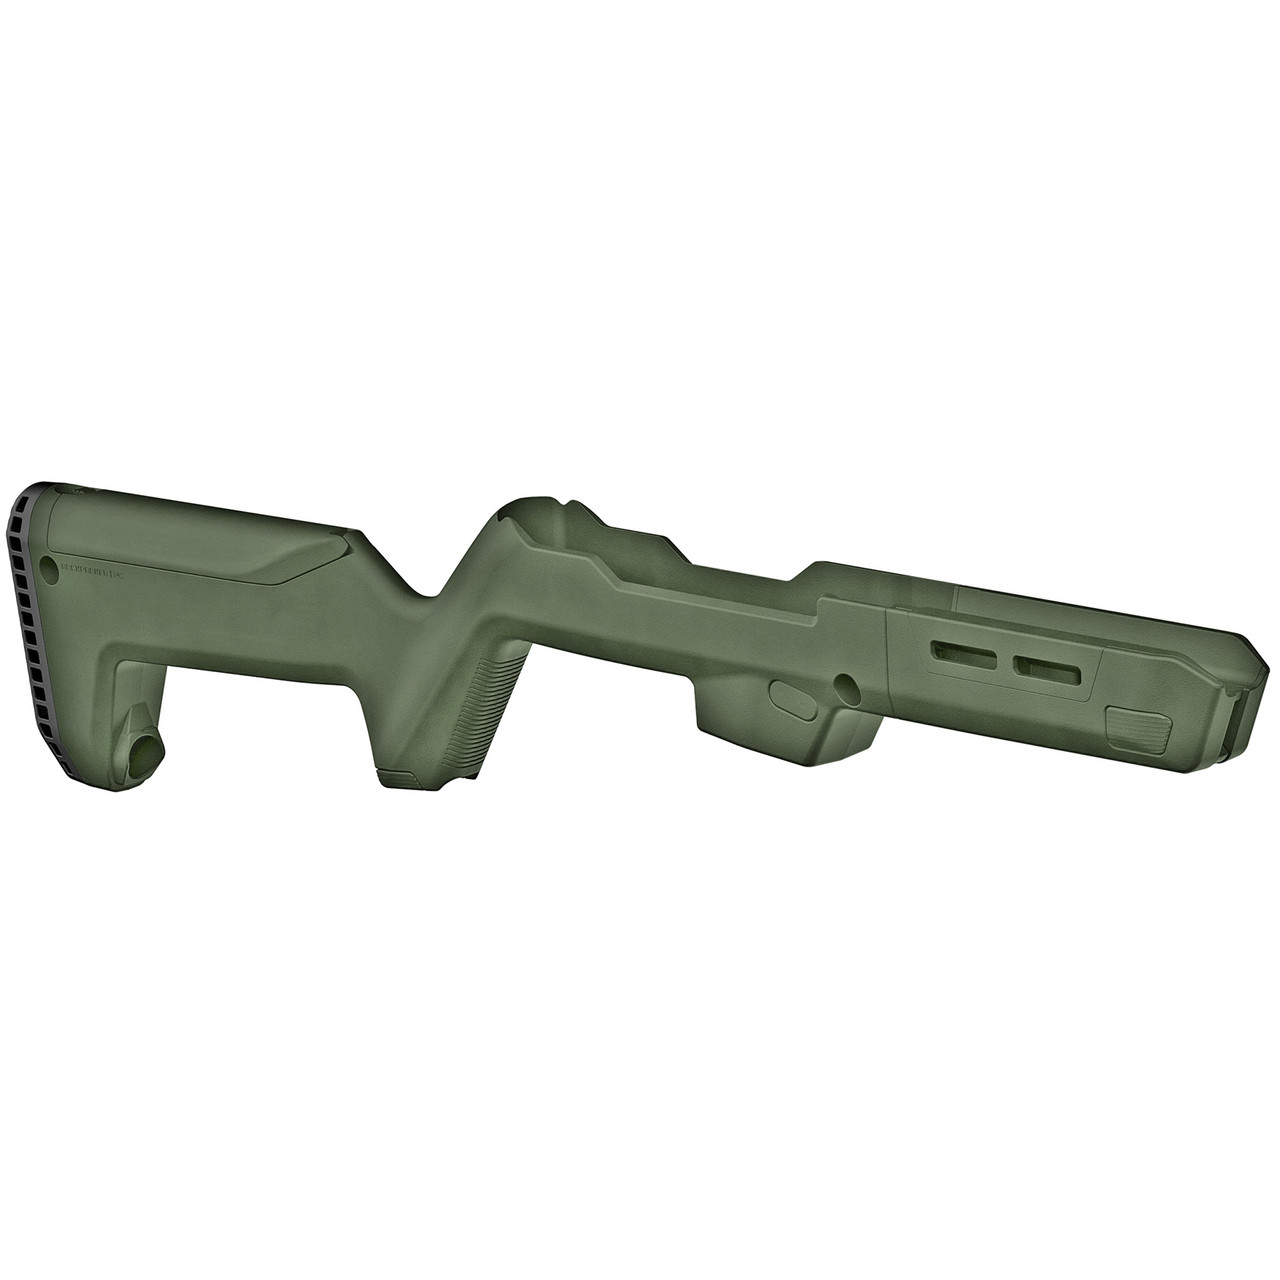 Magpul PC Backpacker Stock - ODG